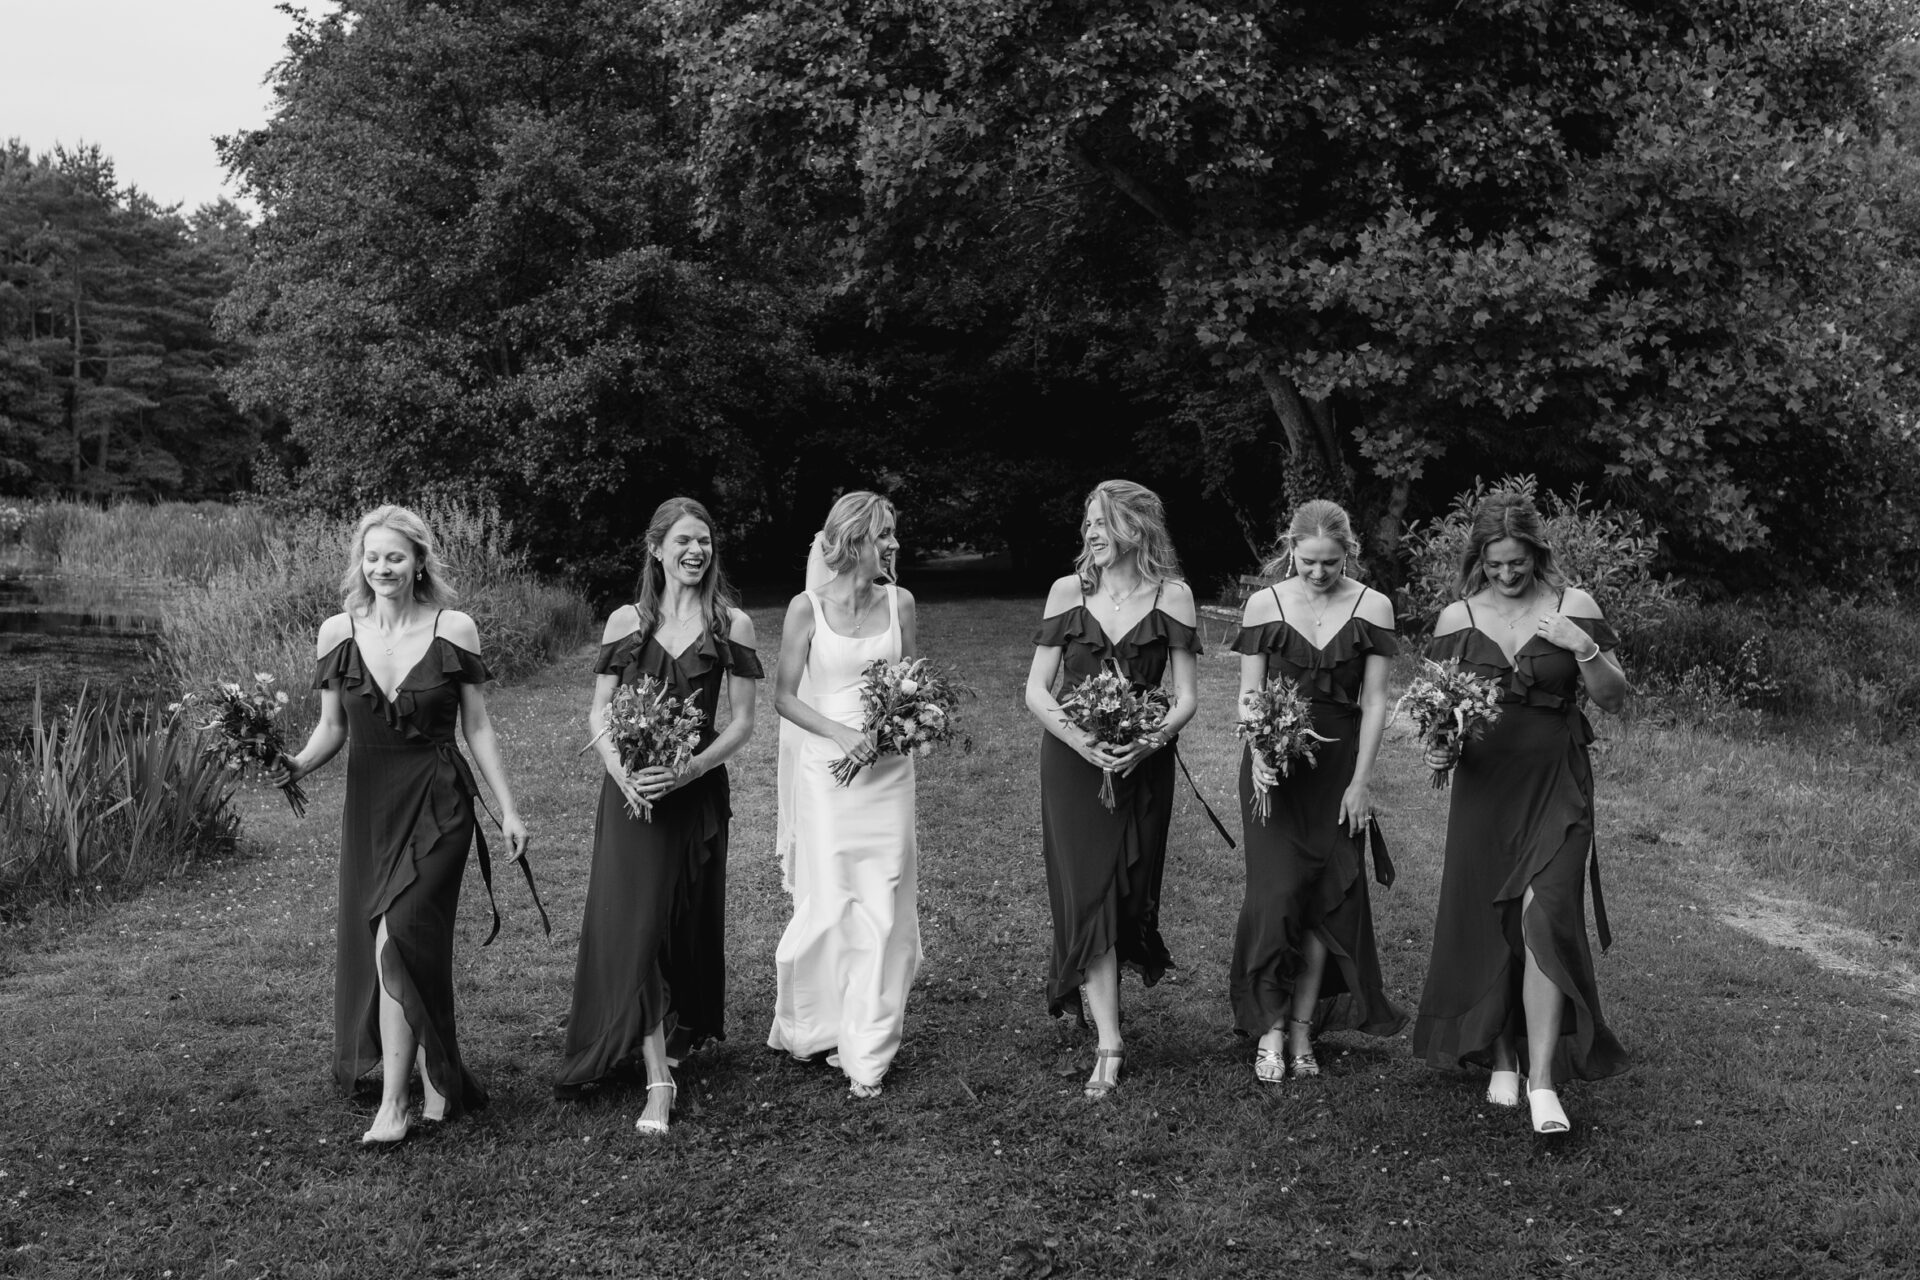 The bride walks with her bridesmaids at the outdoor wedding reception